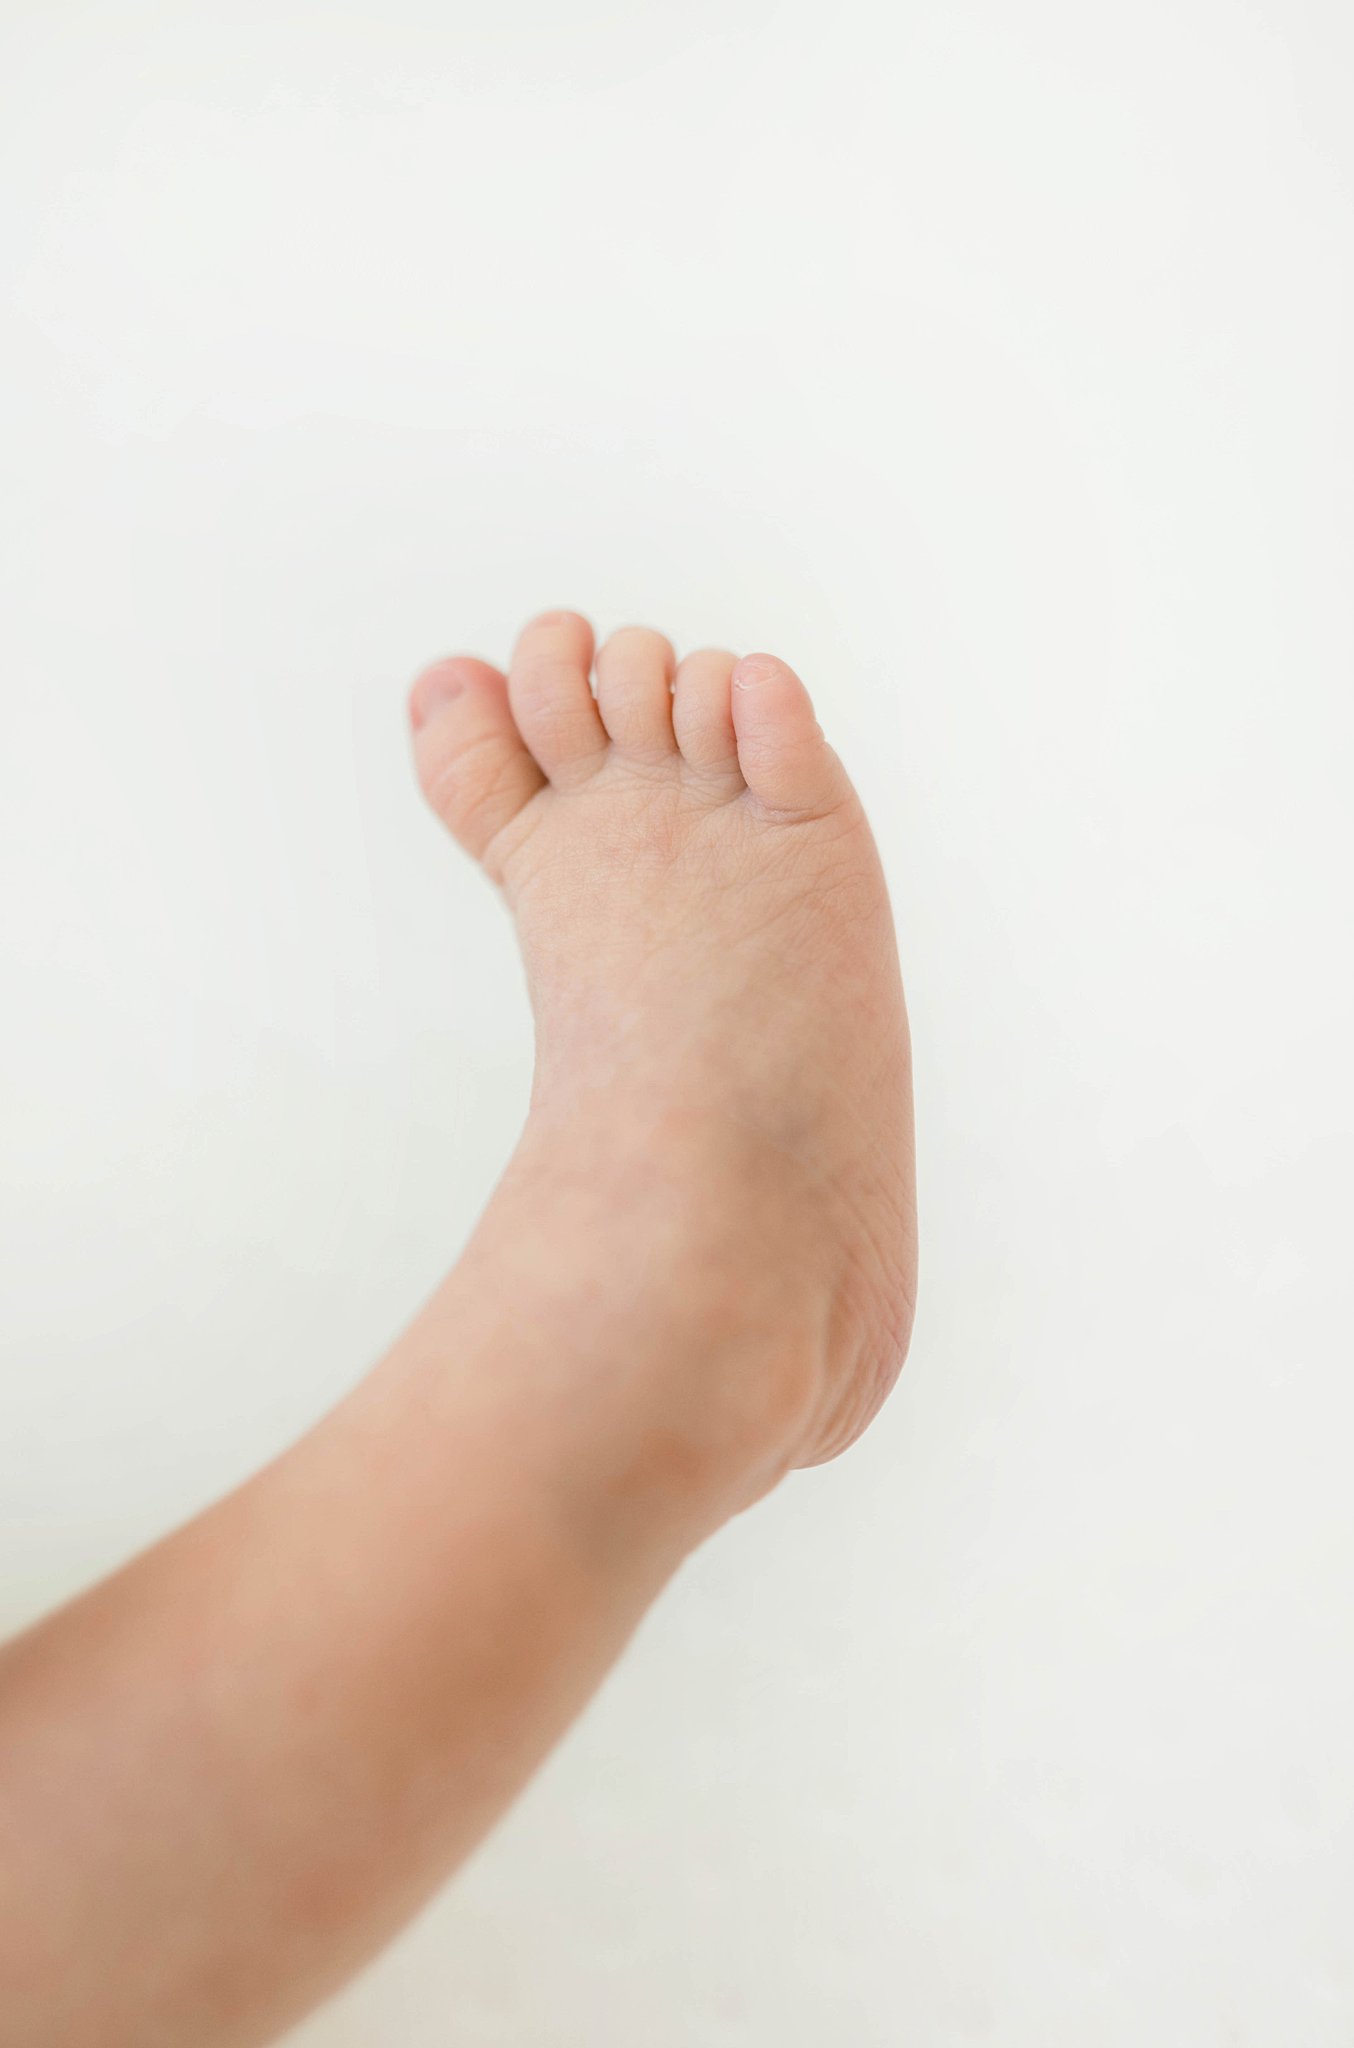 A baby foot sticks into the air of a white room